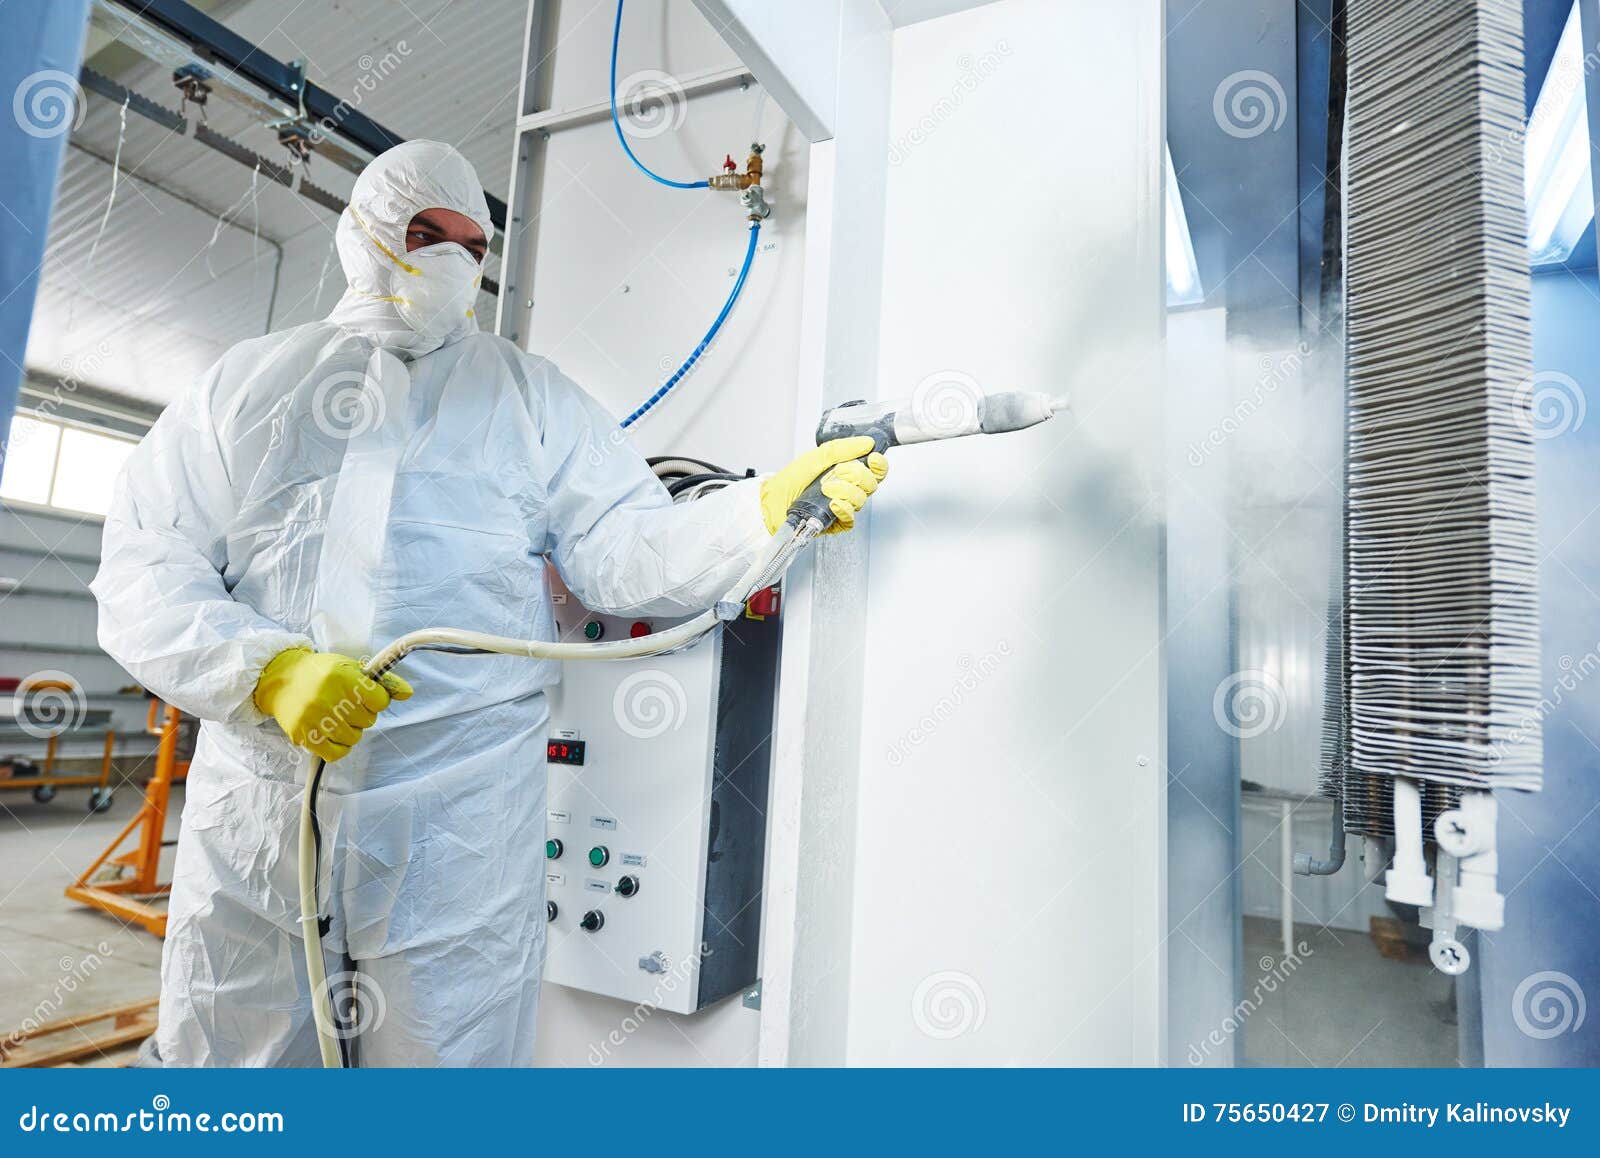 industrial metal coating. man in protective suit, wearing a gas